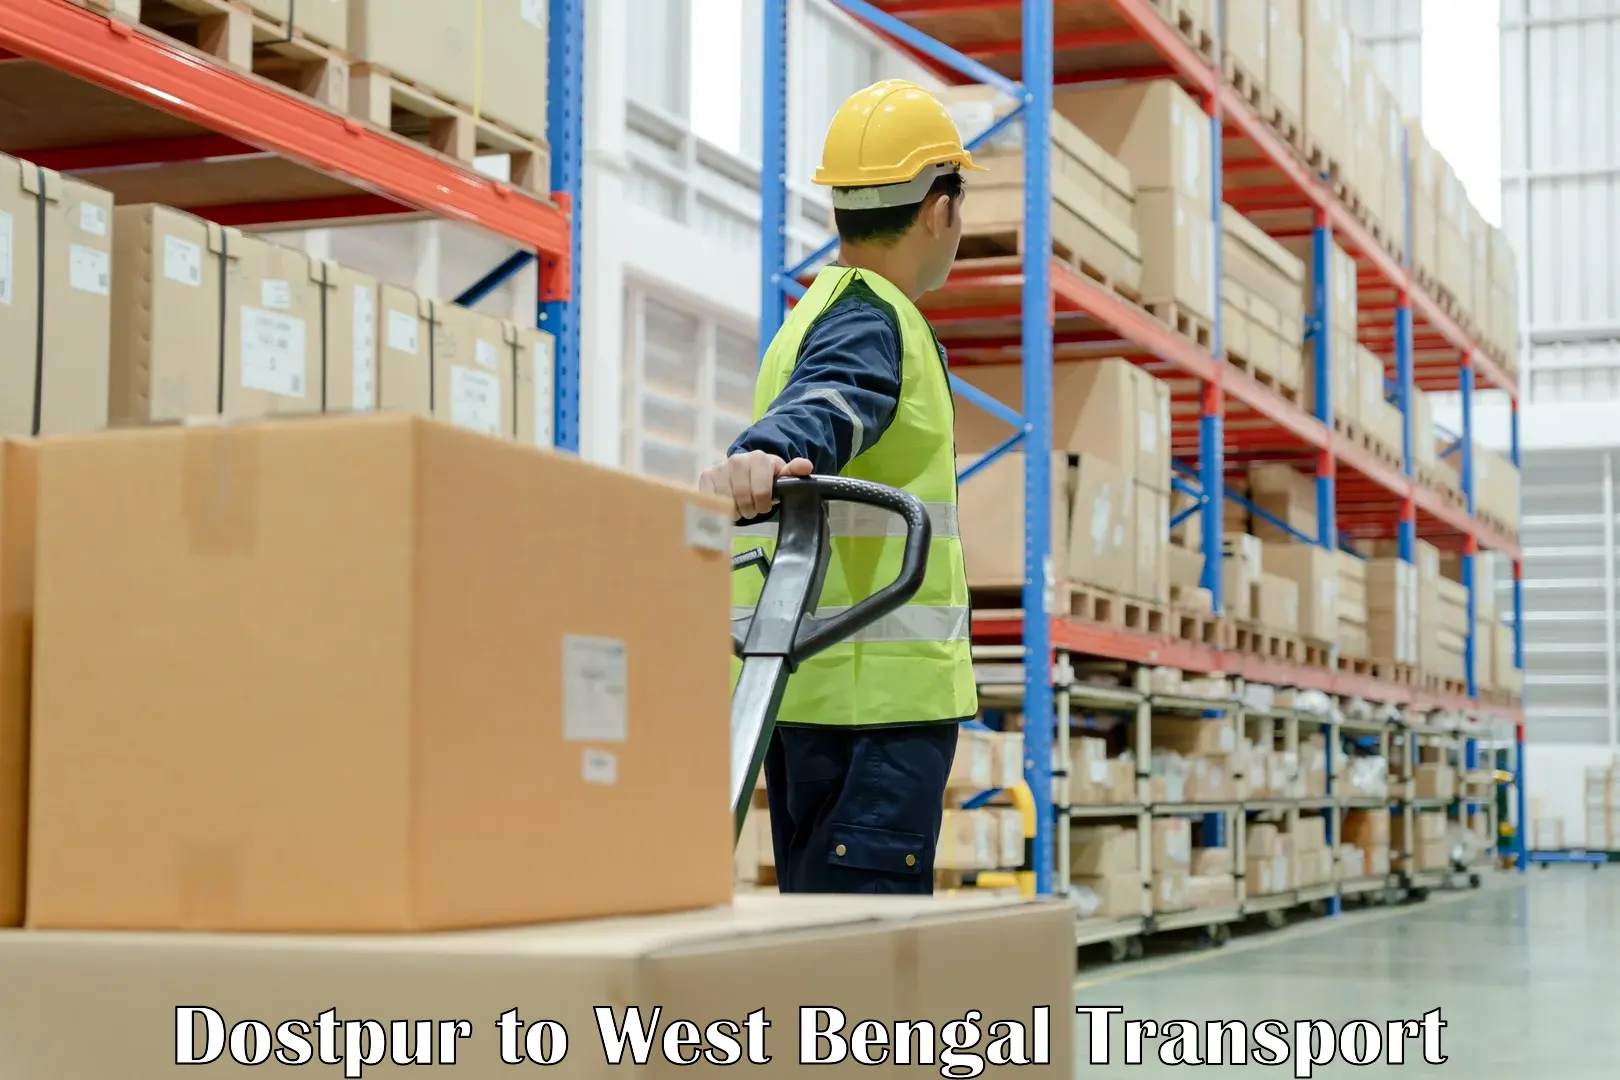 Domestic goods transportation services Dostpur to West Bengal